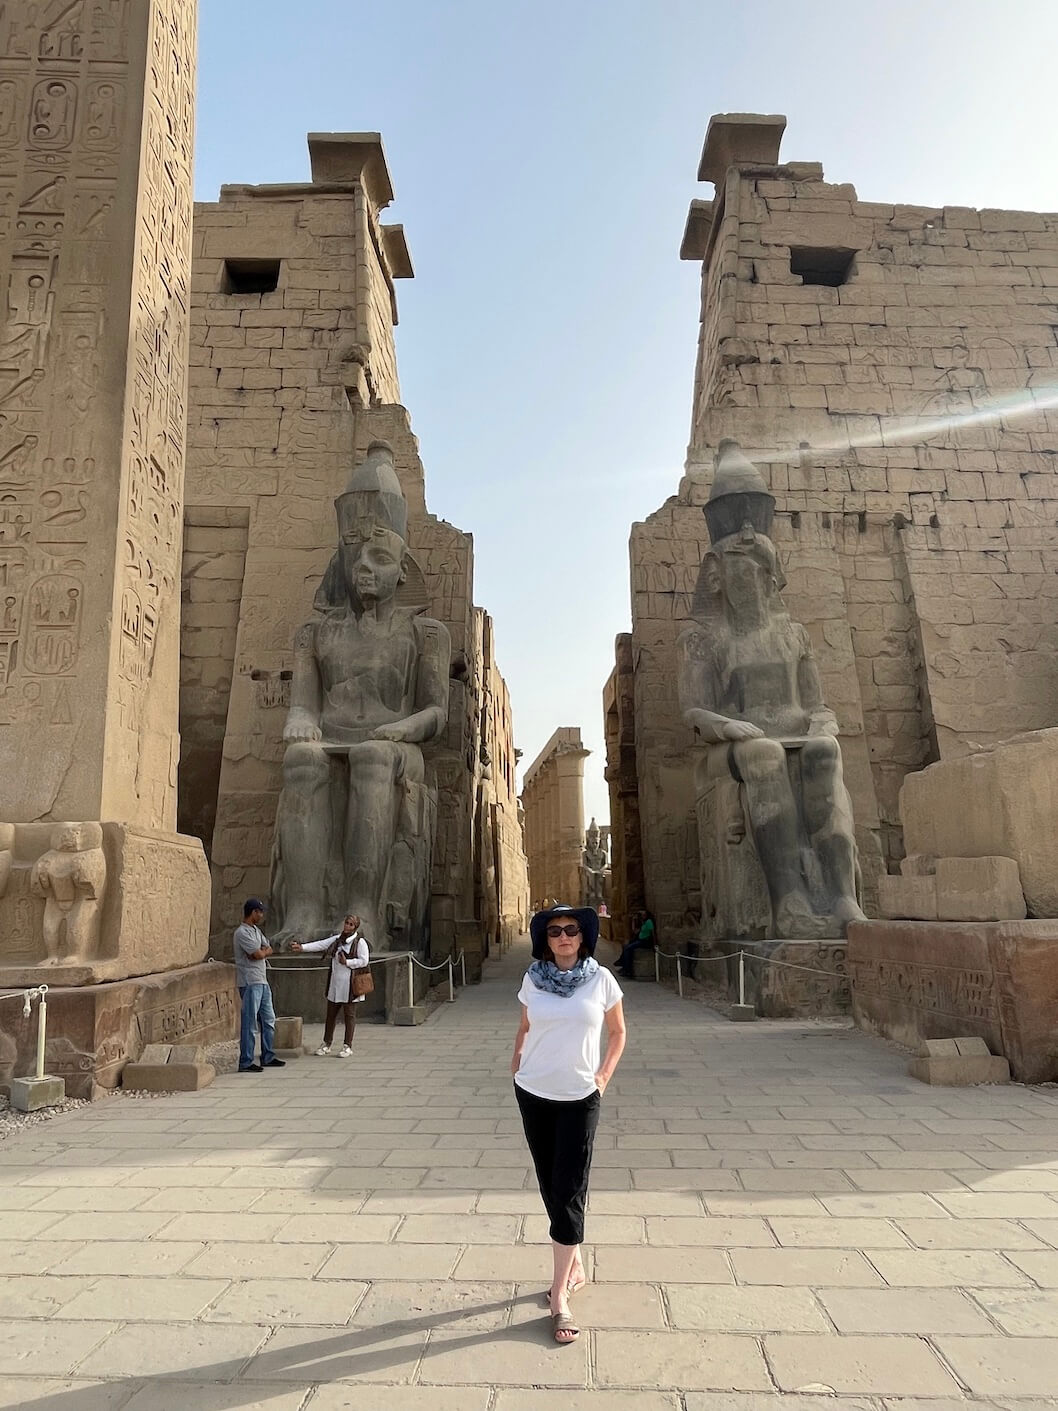 The impressive statues at the entrance to the Temple of Luxor 